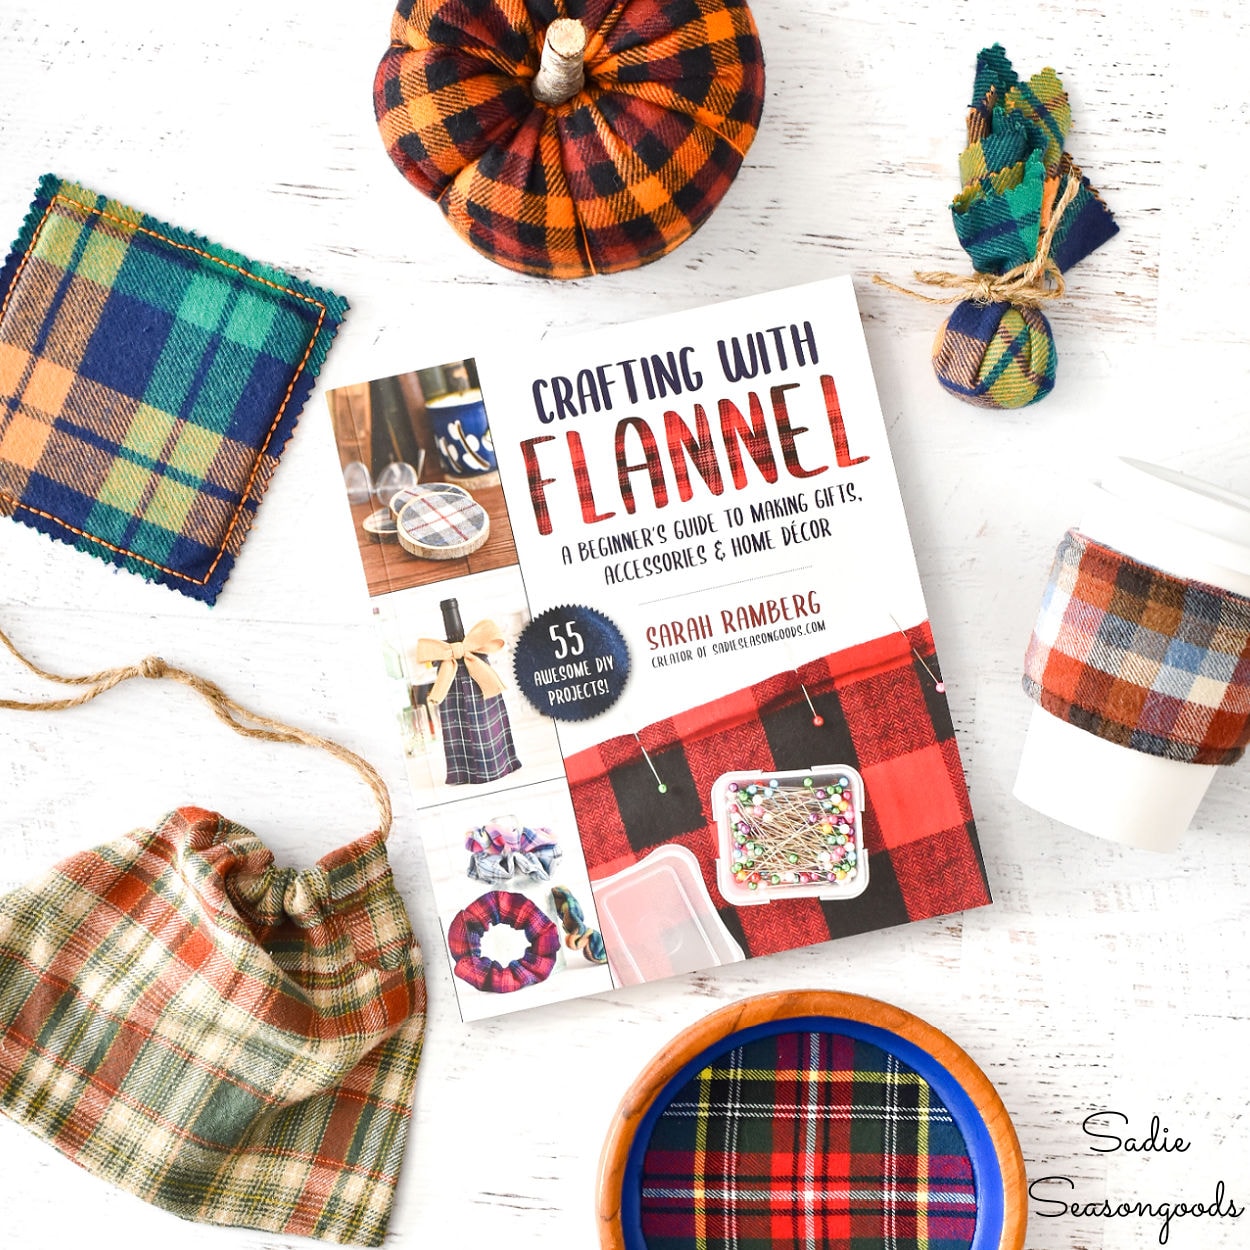 Craft book for flannel shirts